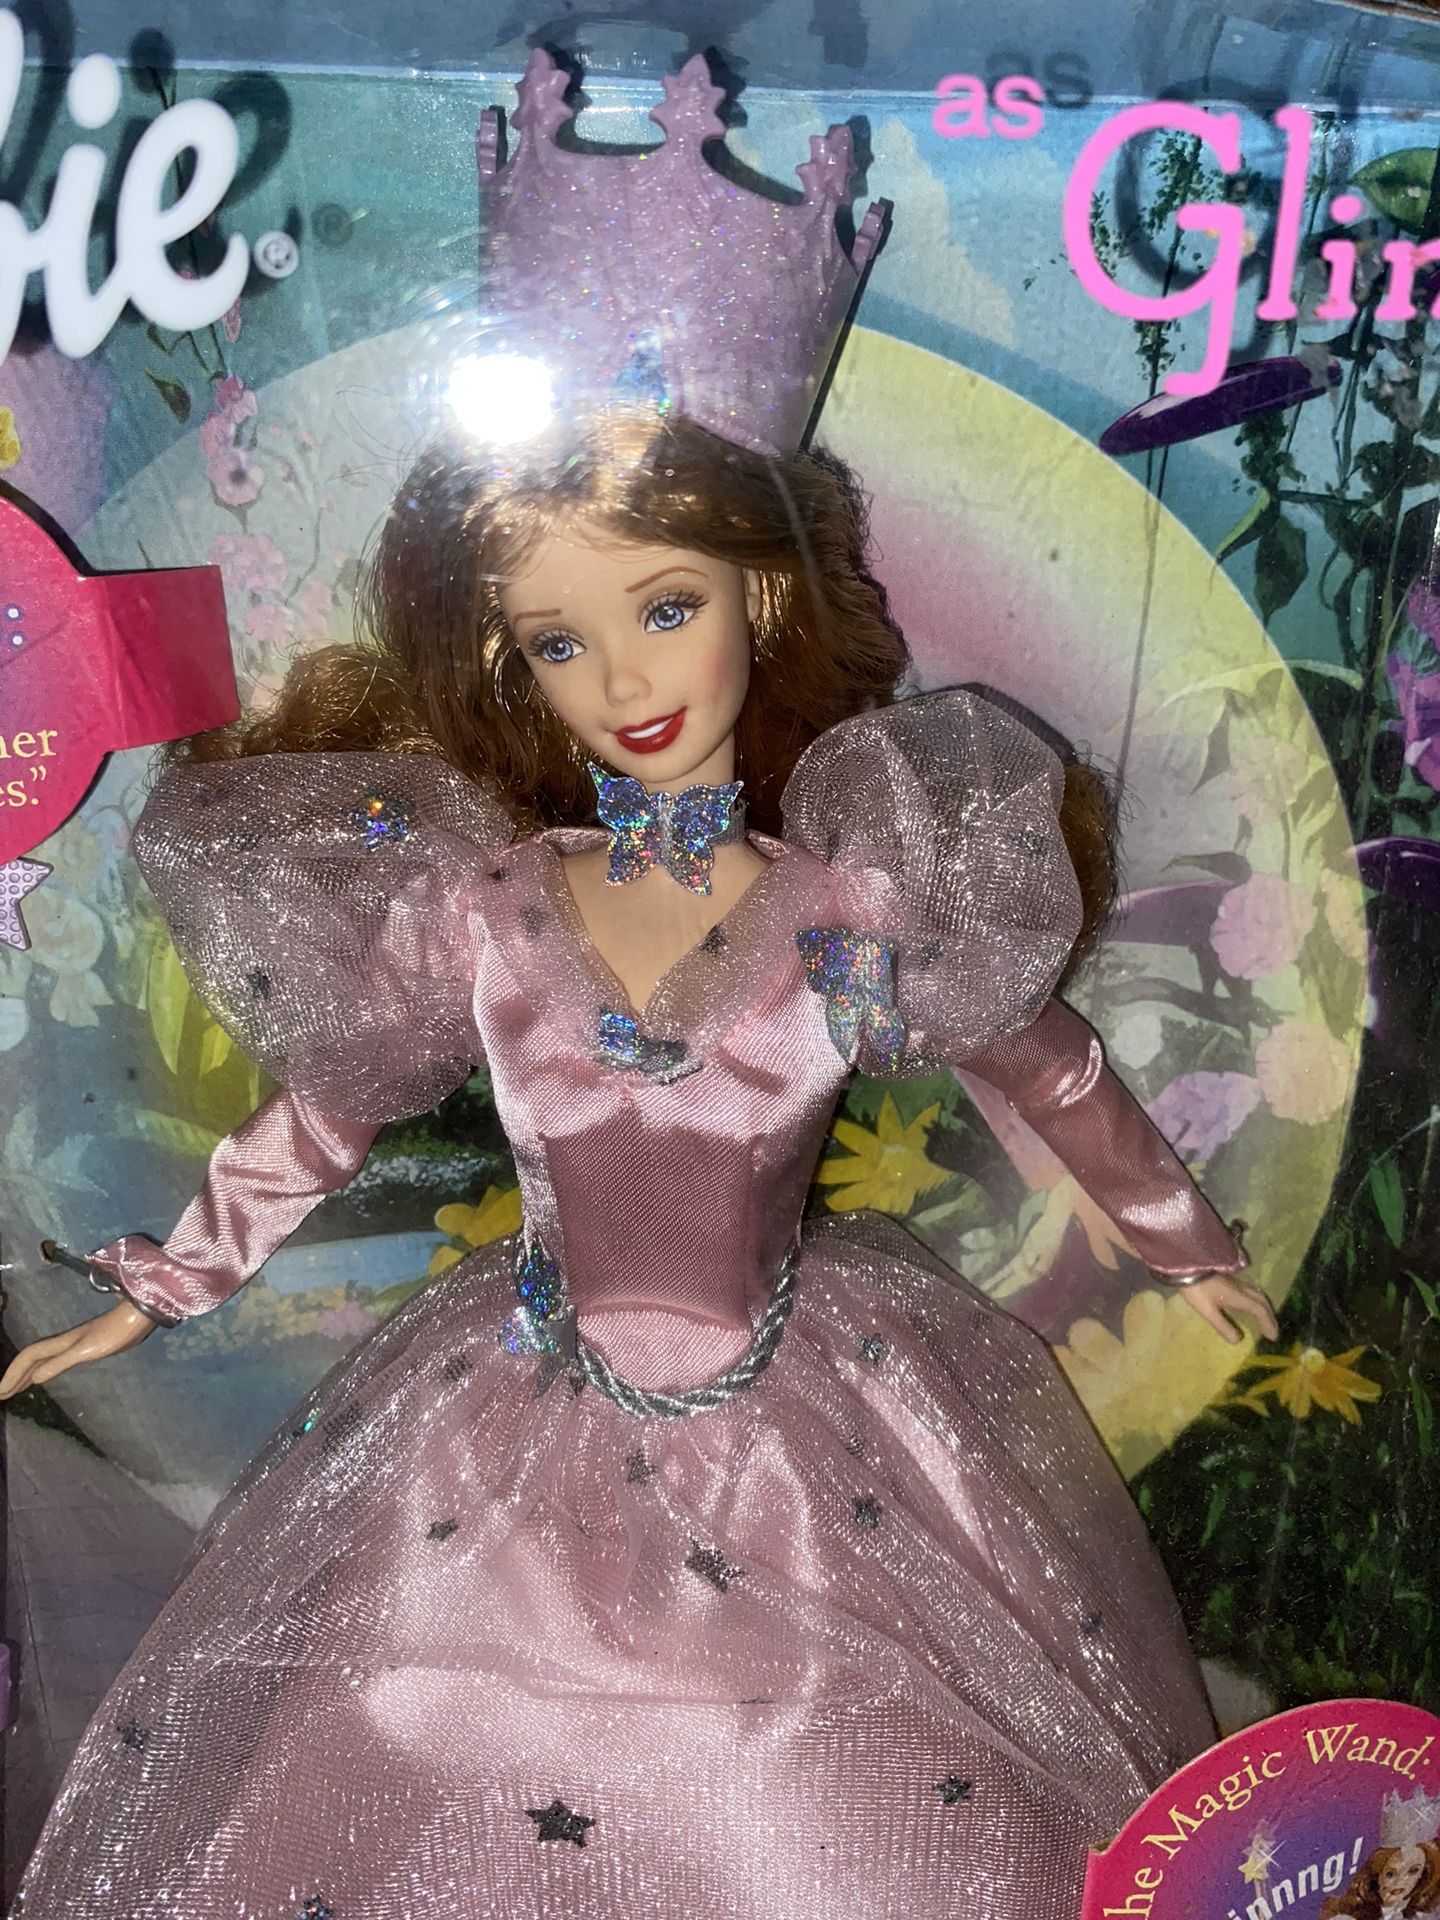 Original Glenda The Good Witch In The Wizard Of Oz Doll